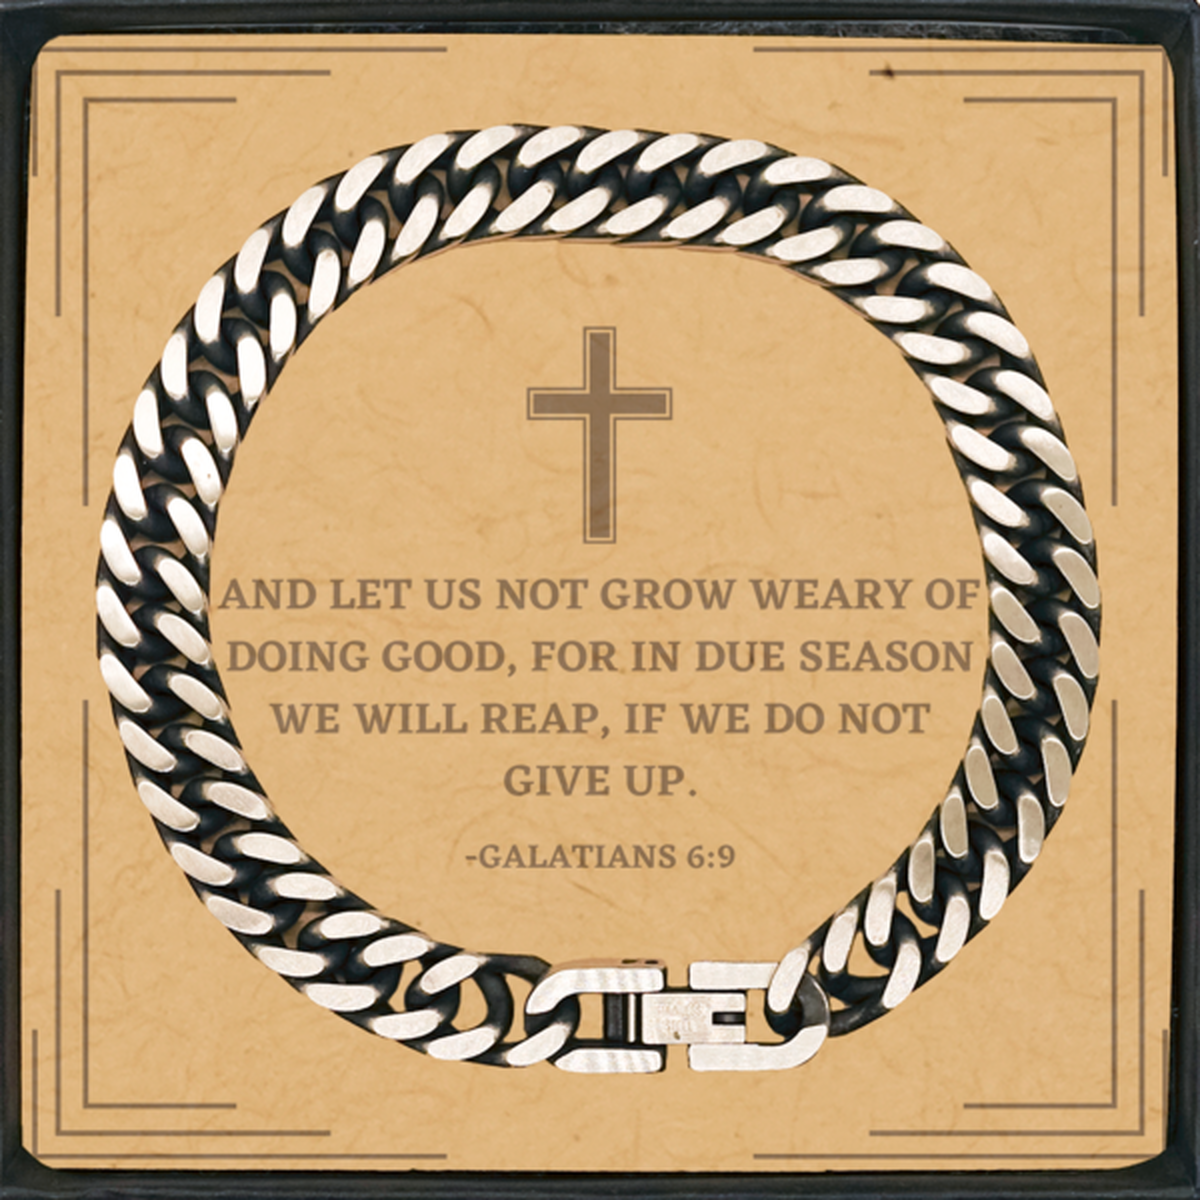 Baptism Gifts For Teenage Boys Girls, Christian Bible Verse Cuban Link Chain Bracelet, And let us not grow weary, Confirmation Gifts, Bible Verse Card for Son, Godson, Grandson